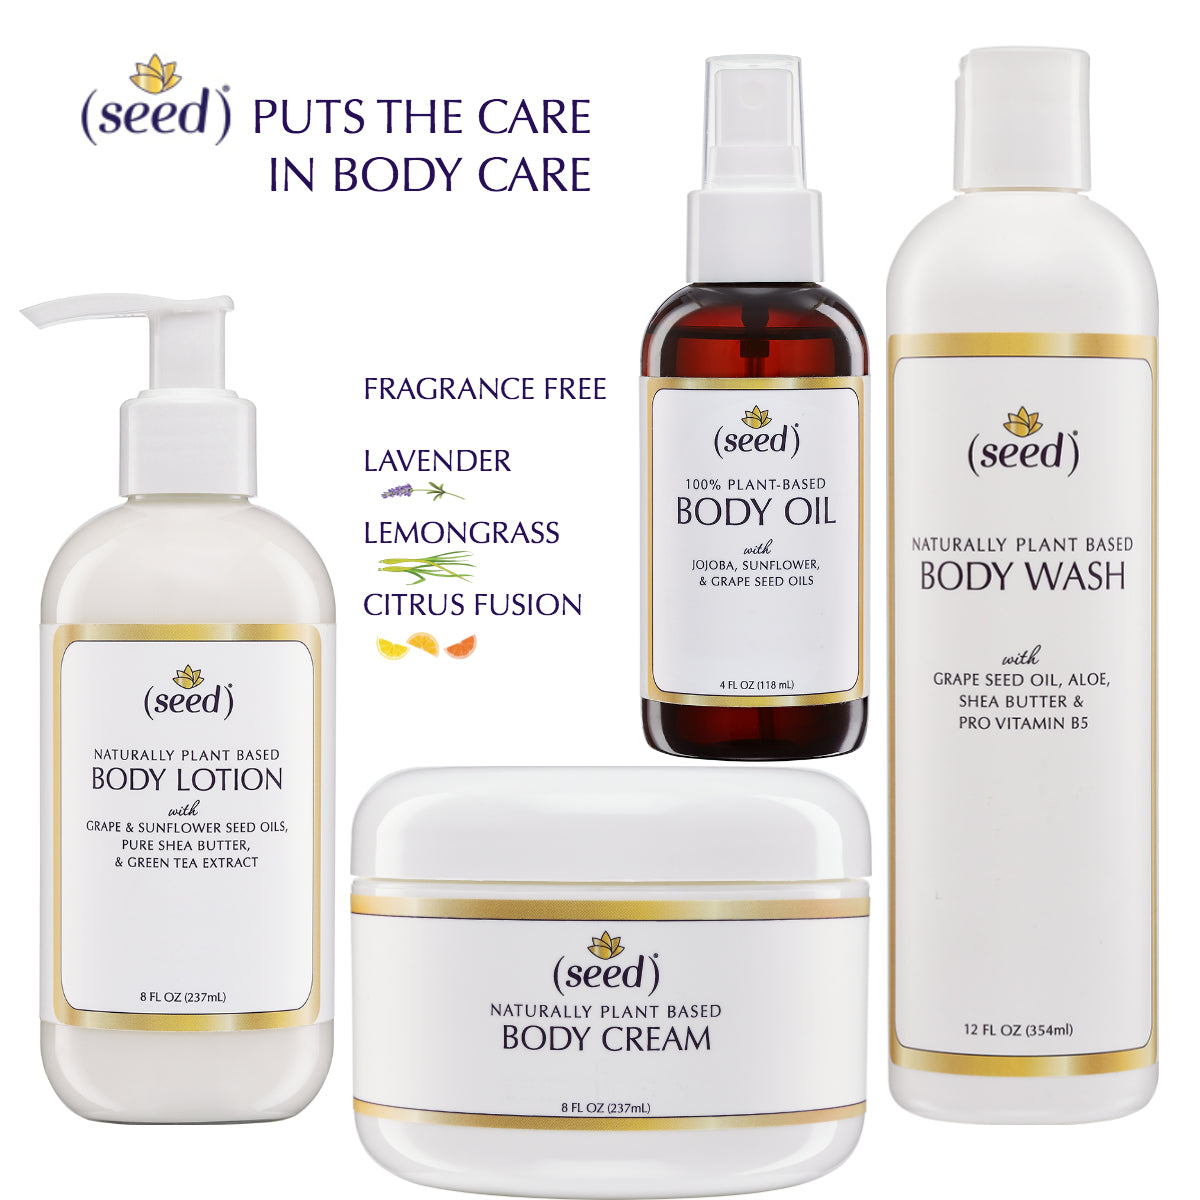 Seed puts the Care in Body Care by Seed Body Care